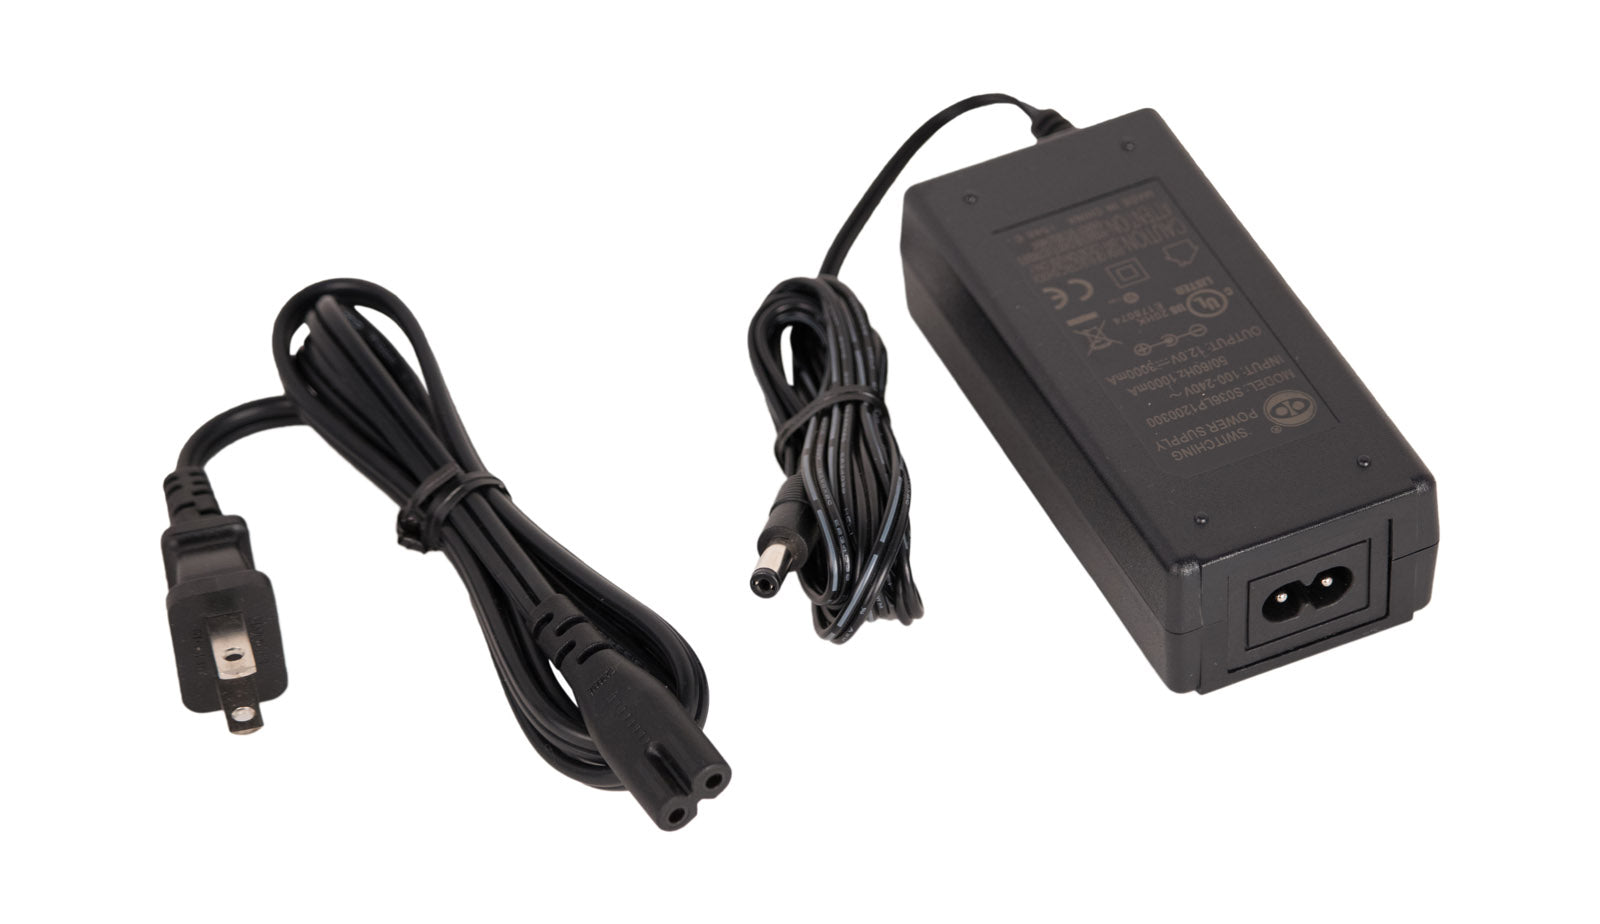 Omilik AC Adapter compatible with Delphi XM Roady 2 SA10085-11P1